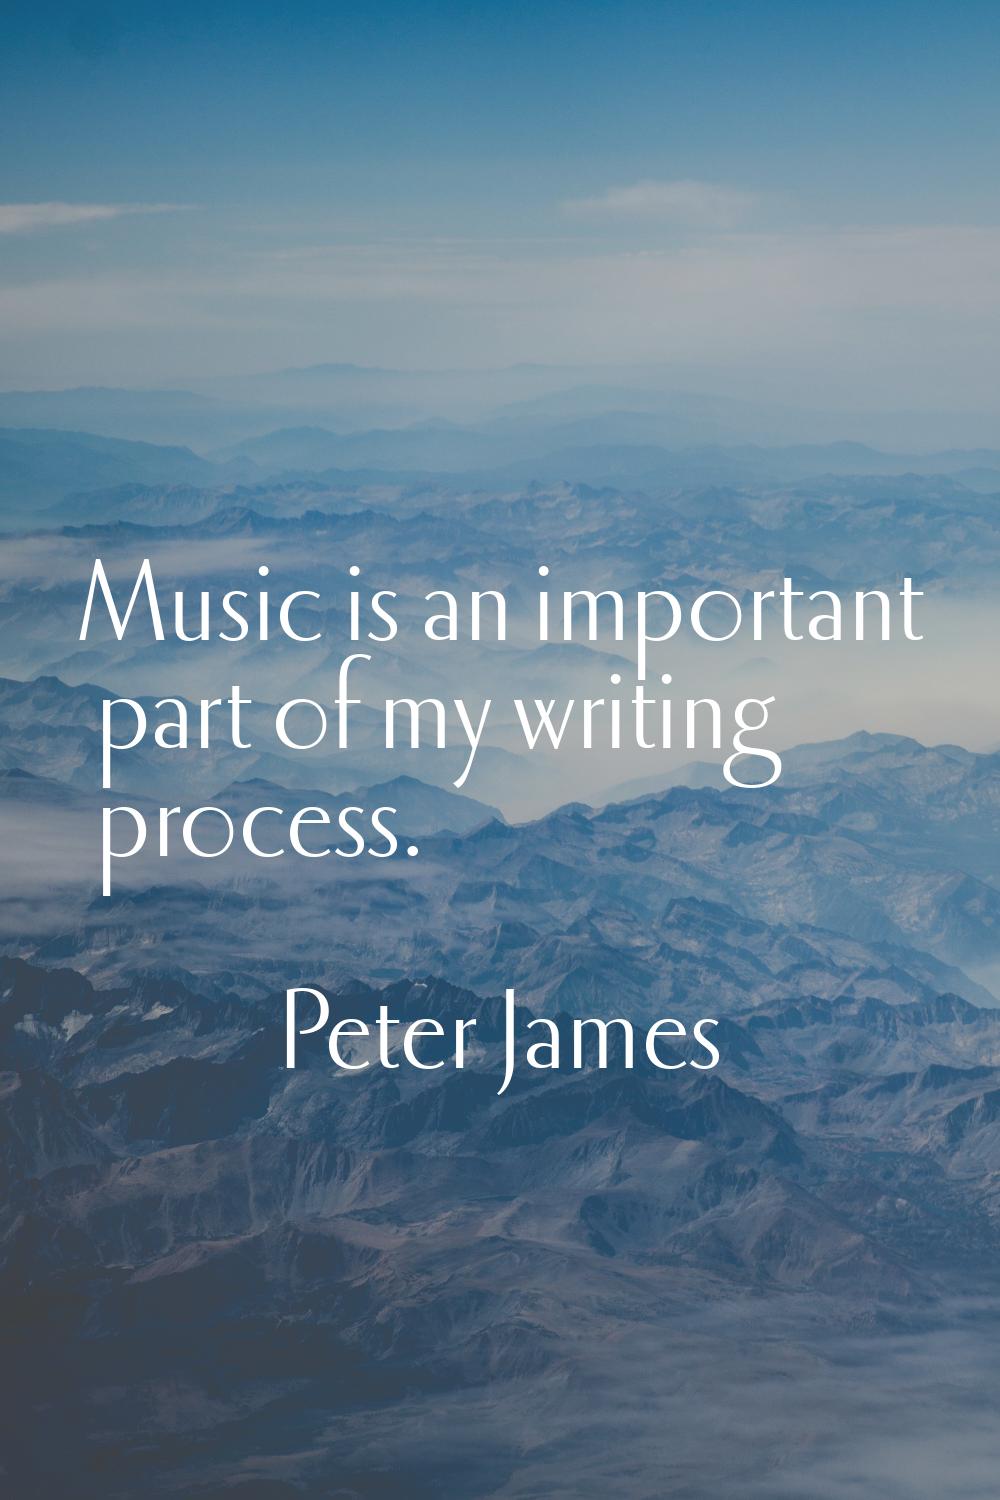 Music is an important part of my writing process.